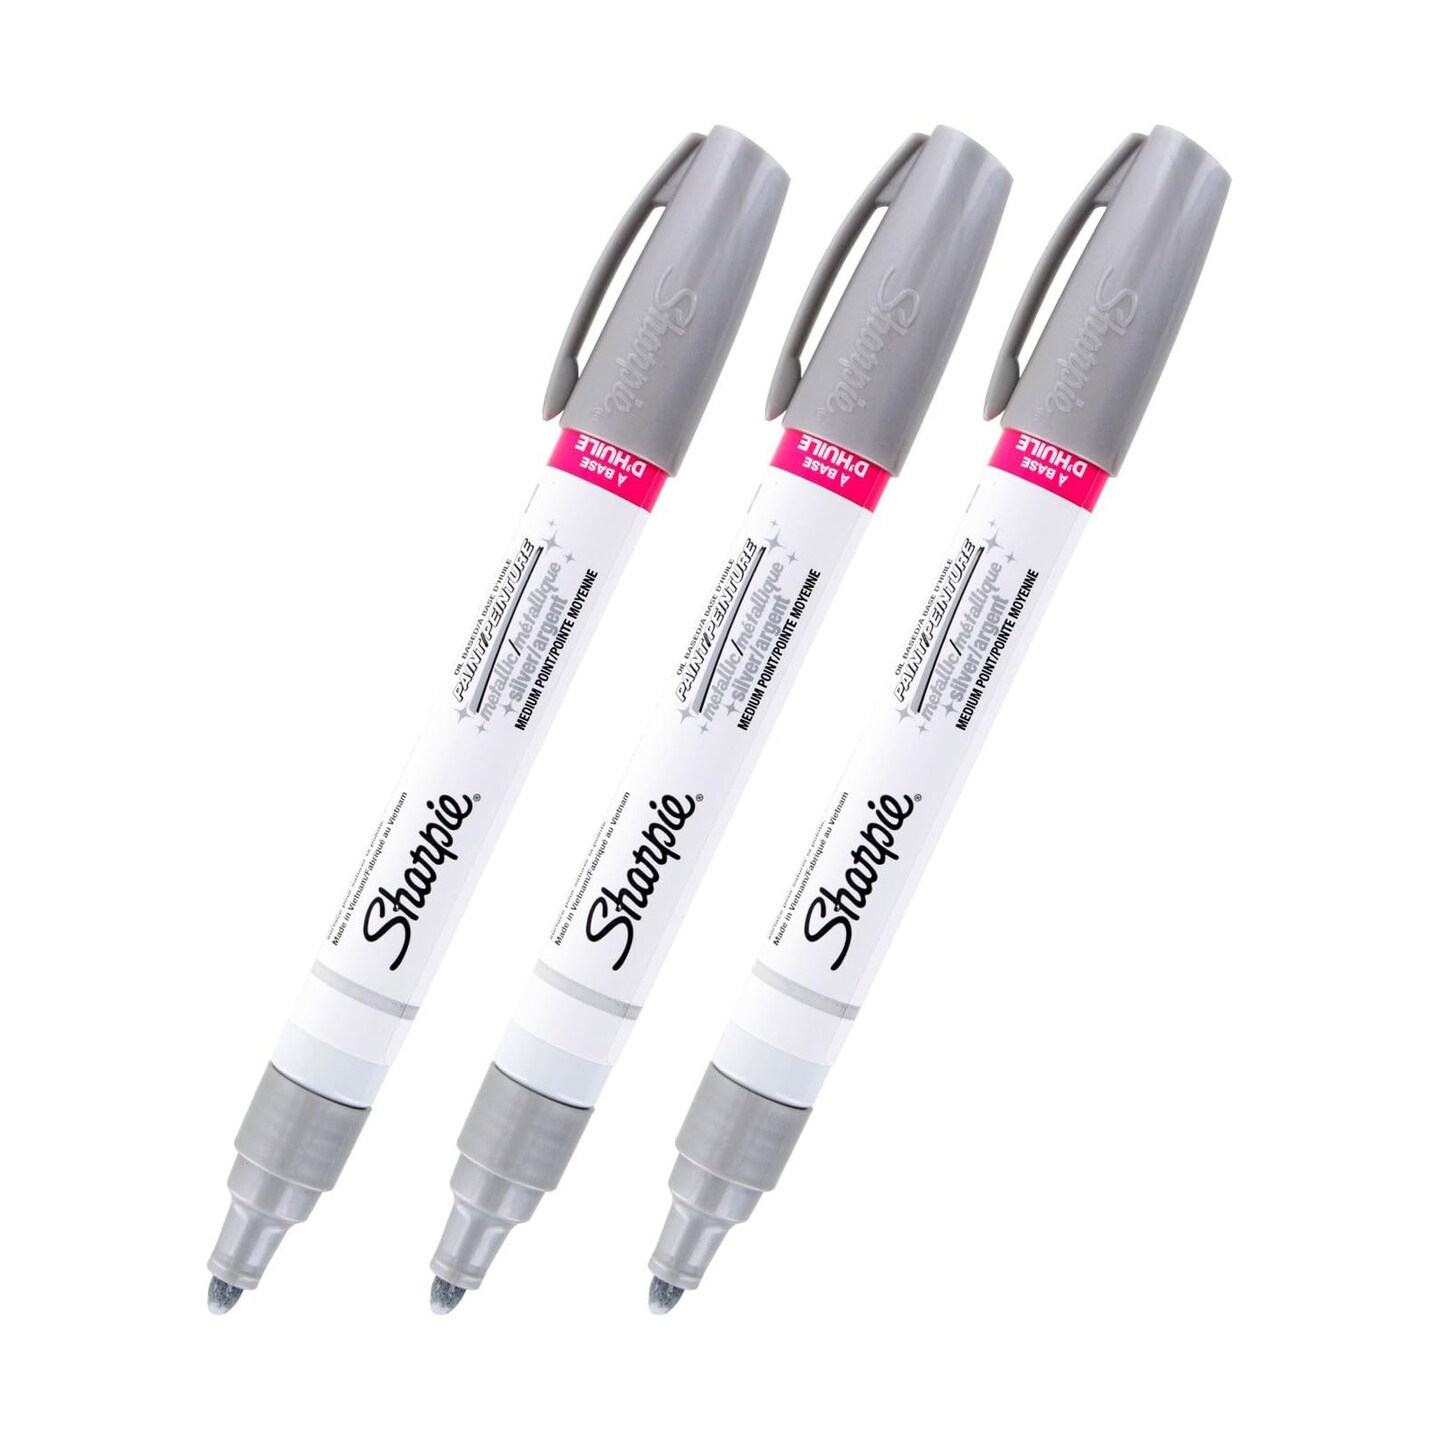 Solid Paint Windshield Marker Grease Pen 13mm Pointed Tip (1/2 Tip)